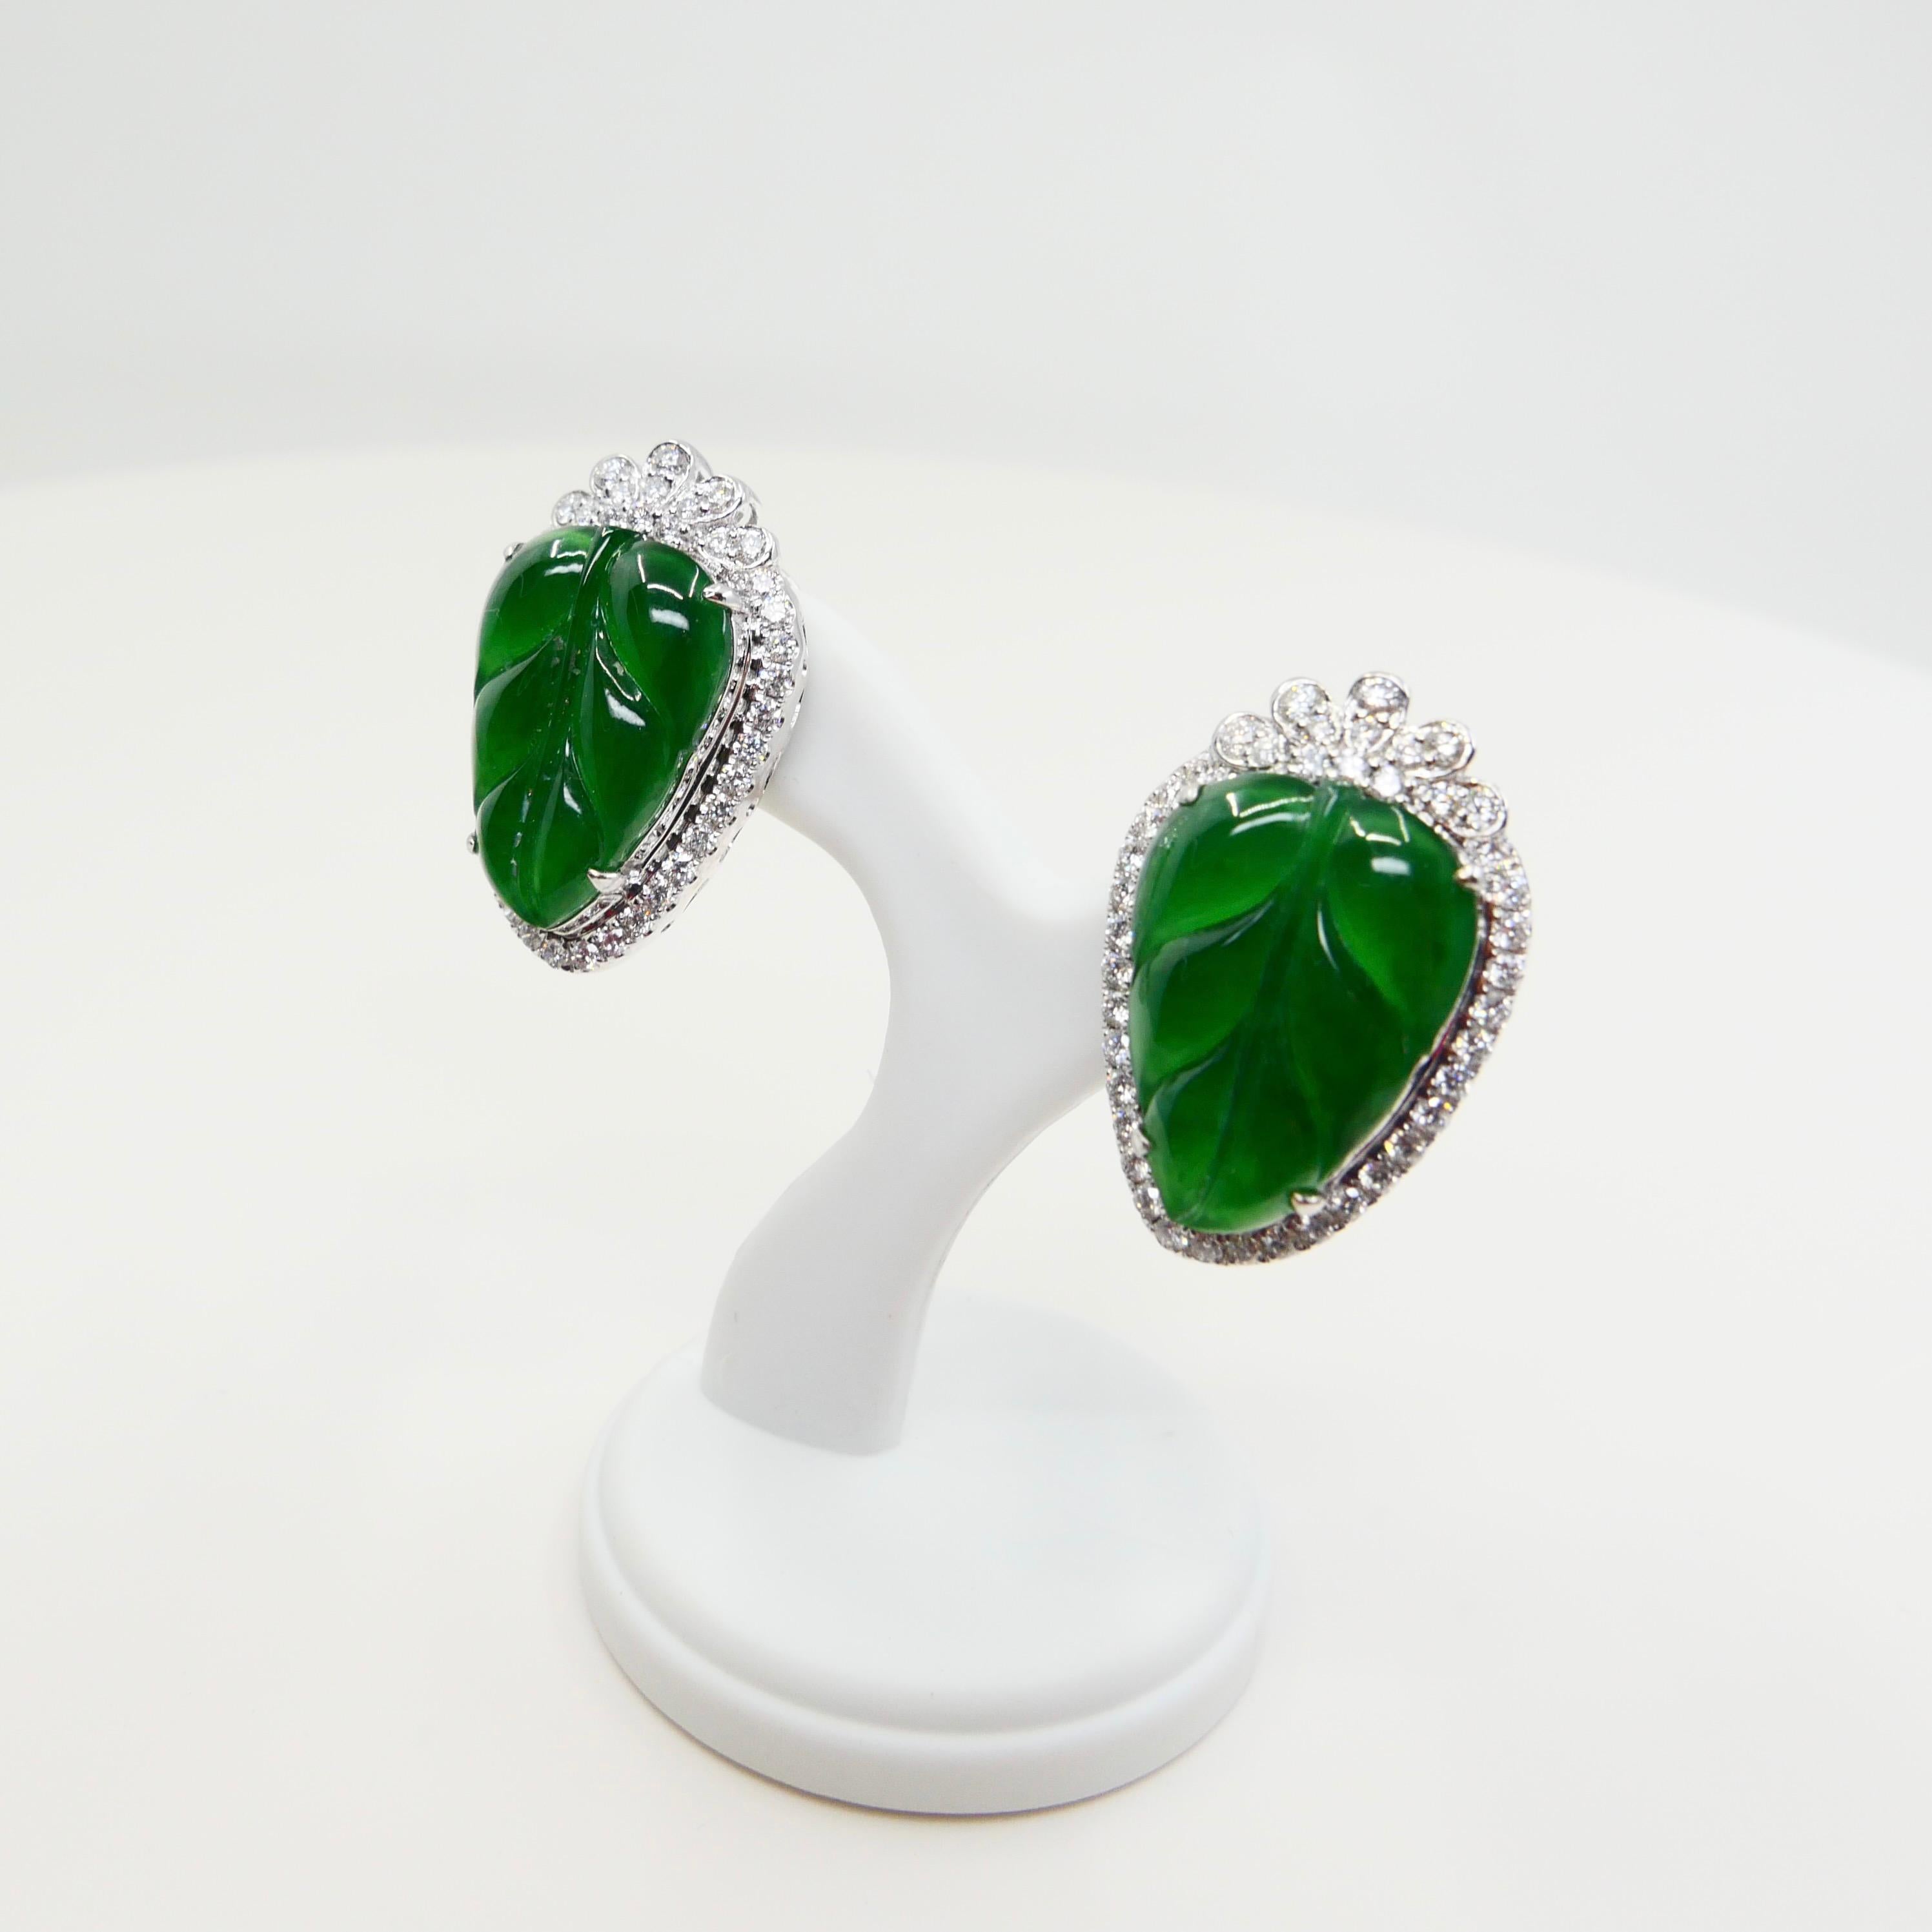 Certified Icy Imperial Green Jade and Diamond Earrings, Collector's Quality For Sale 6